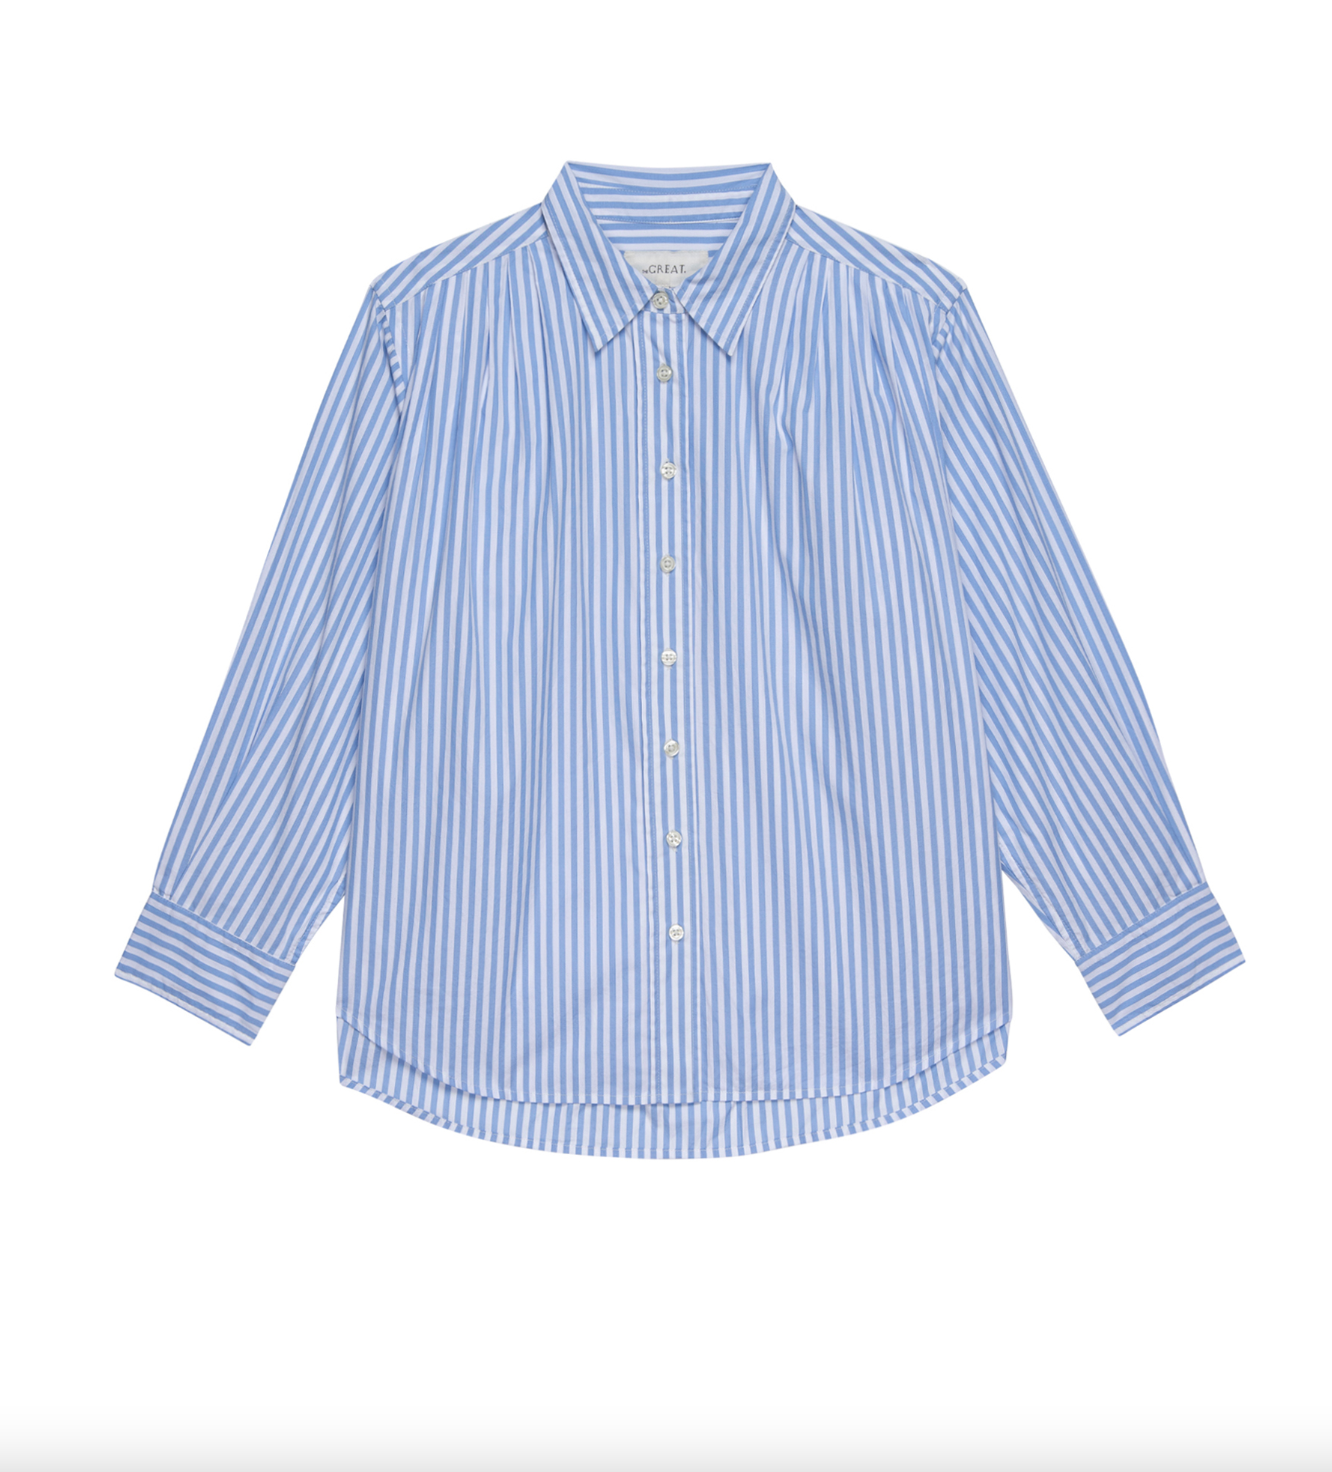 A The Society Top LIGHT SKY STUDIO STRIPE button-up shirt with long sleeves, displayed on a white background in a Scottsdale Arizona bungalow.